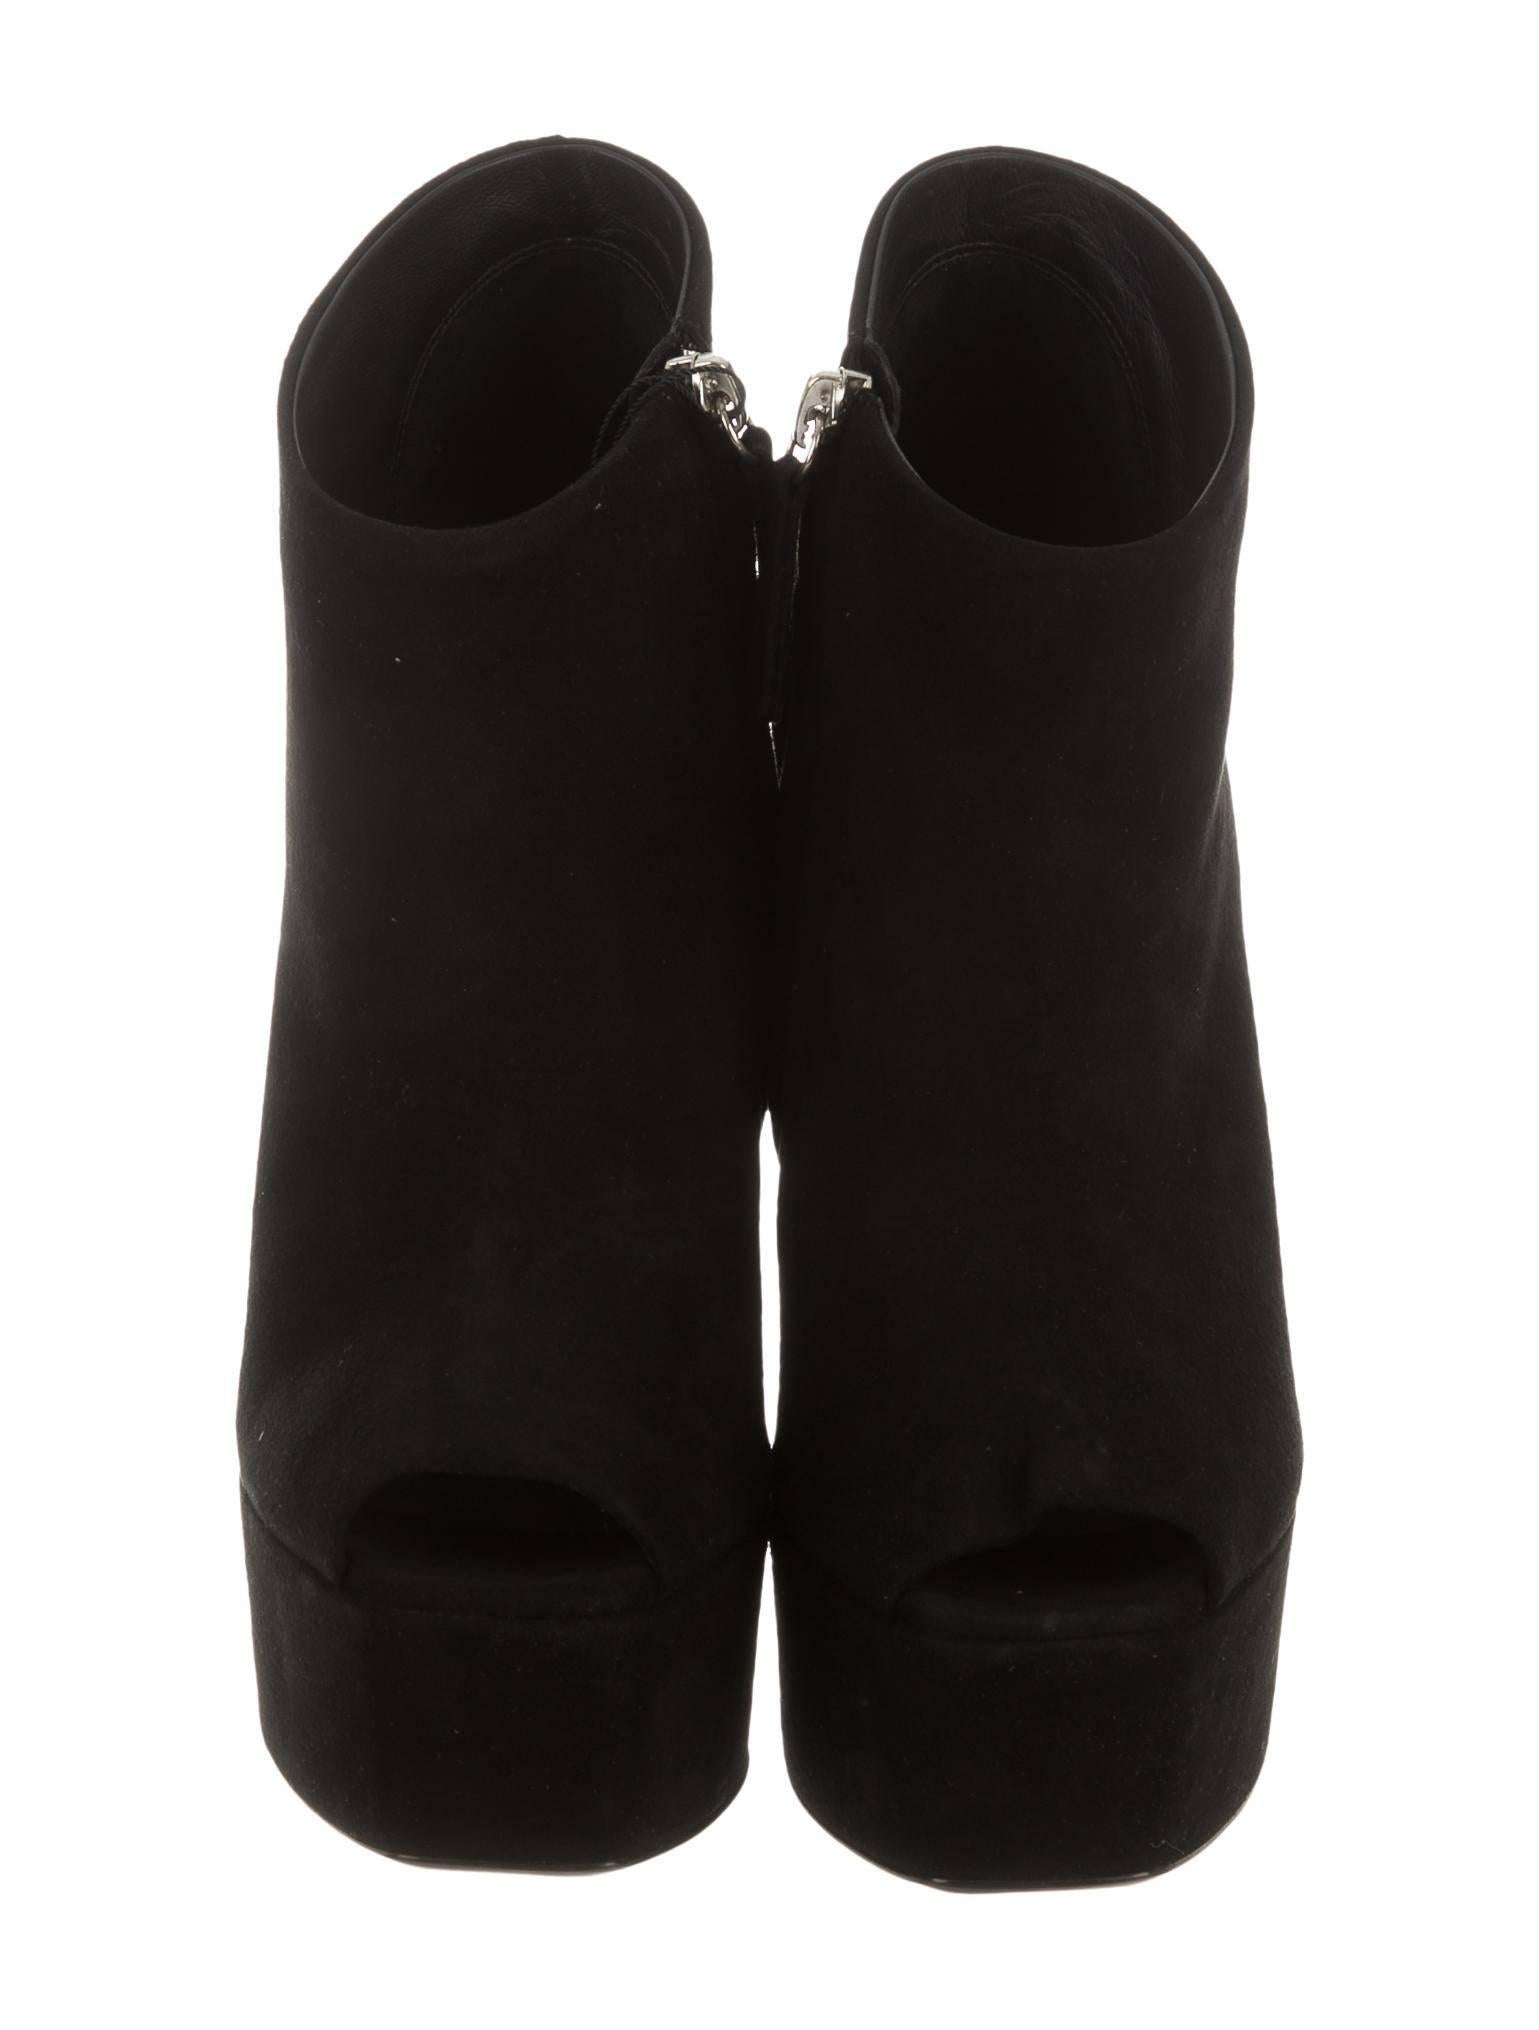 Women's Giuseppe Zanotti NEW & SOLD OUT Black Suede Embellished Ankle Booties in Box